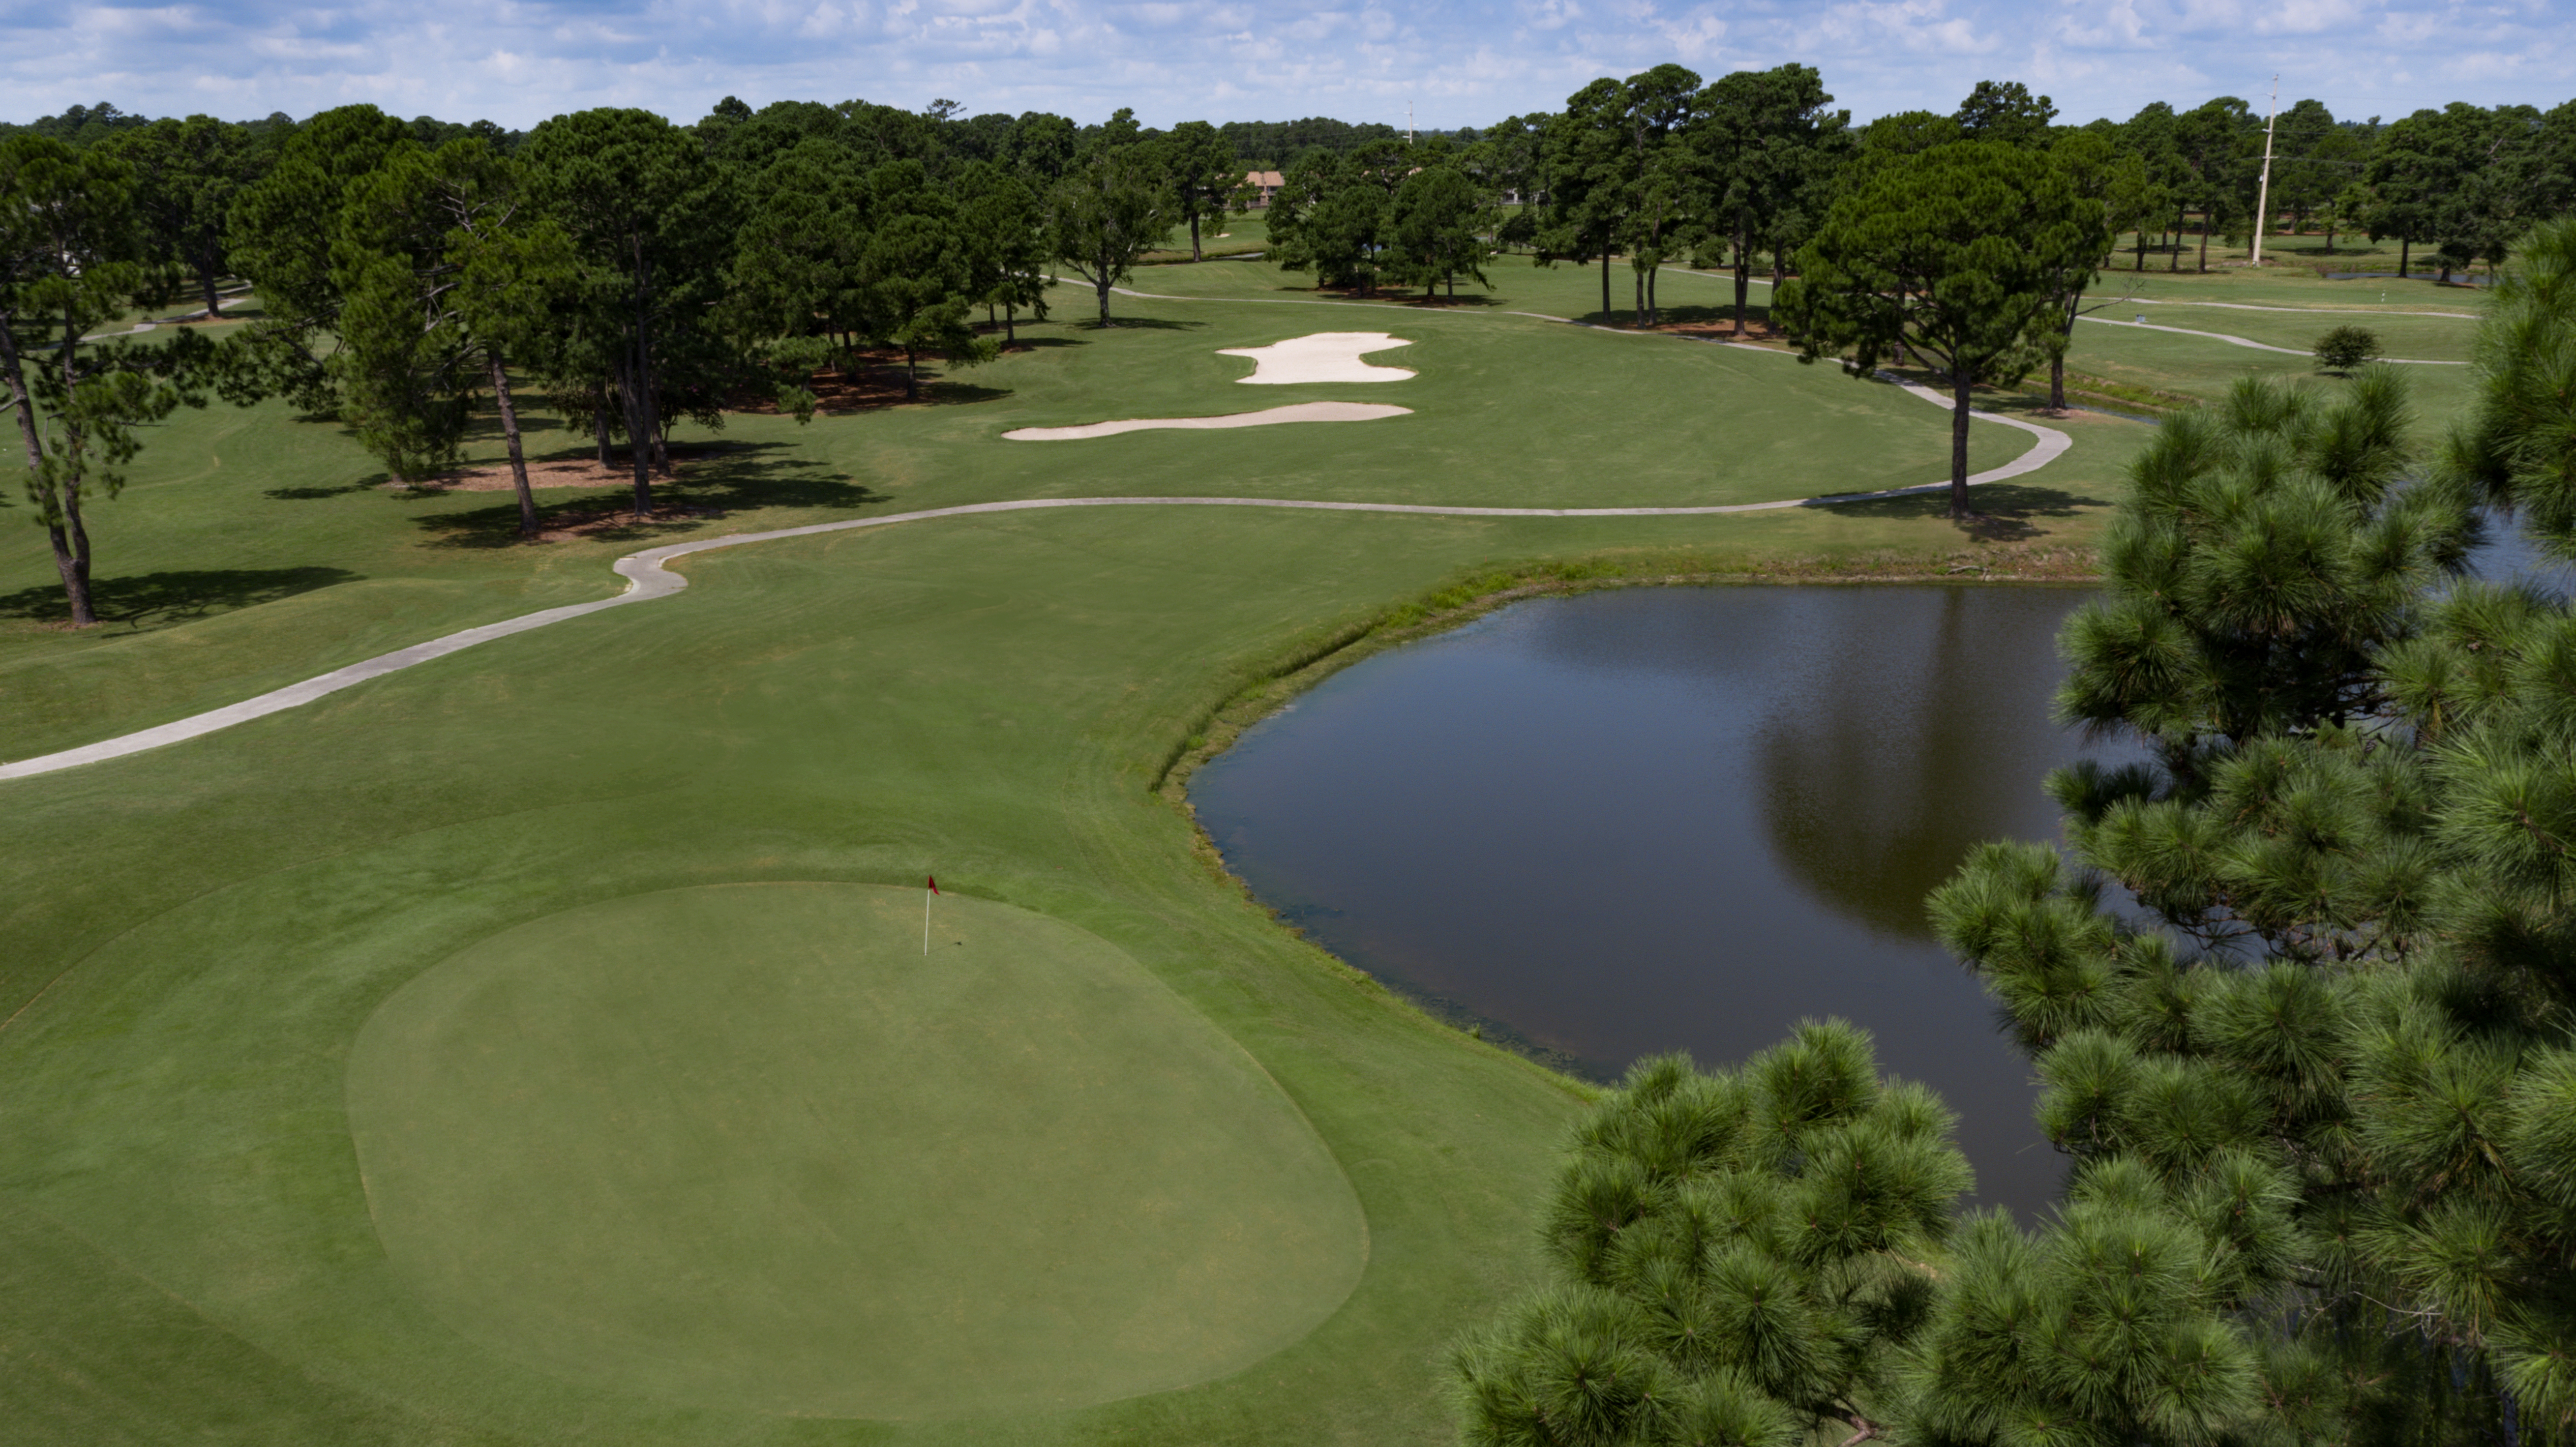 The PineHills Course at Myrtlewood Golf Club